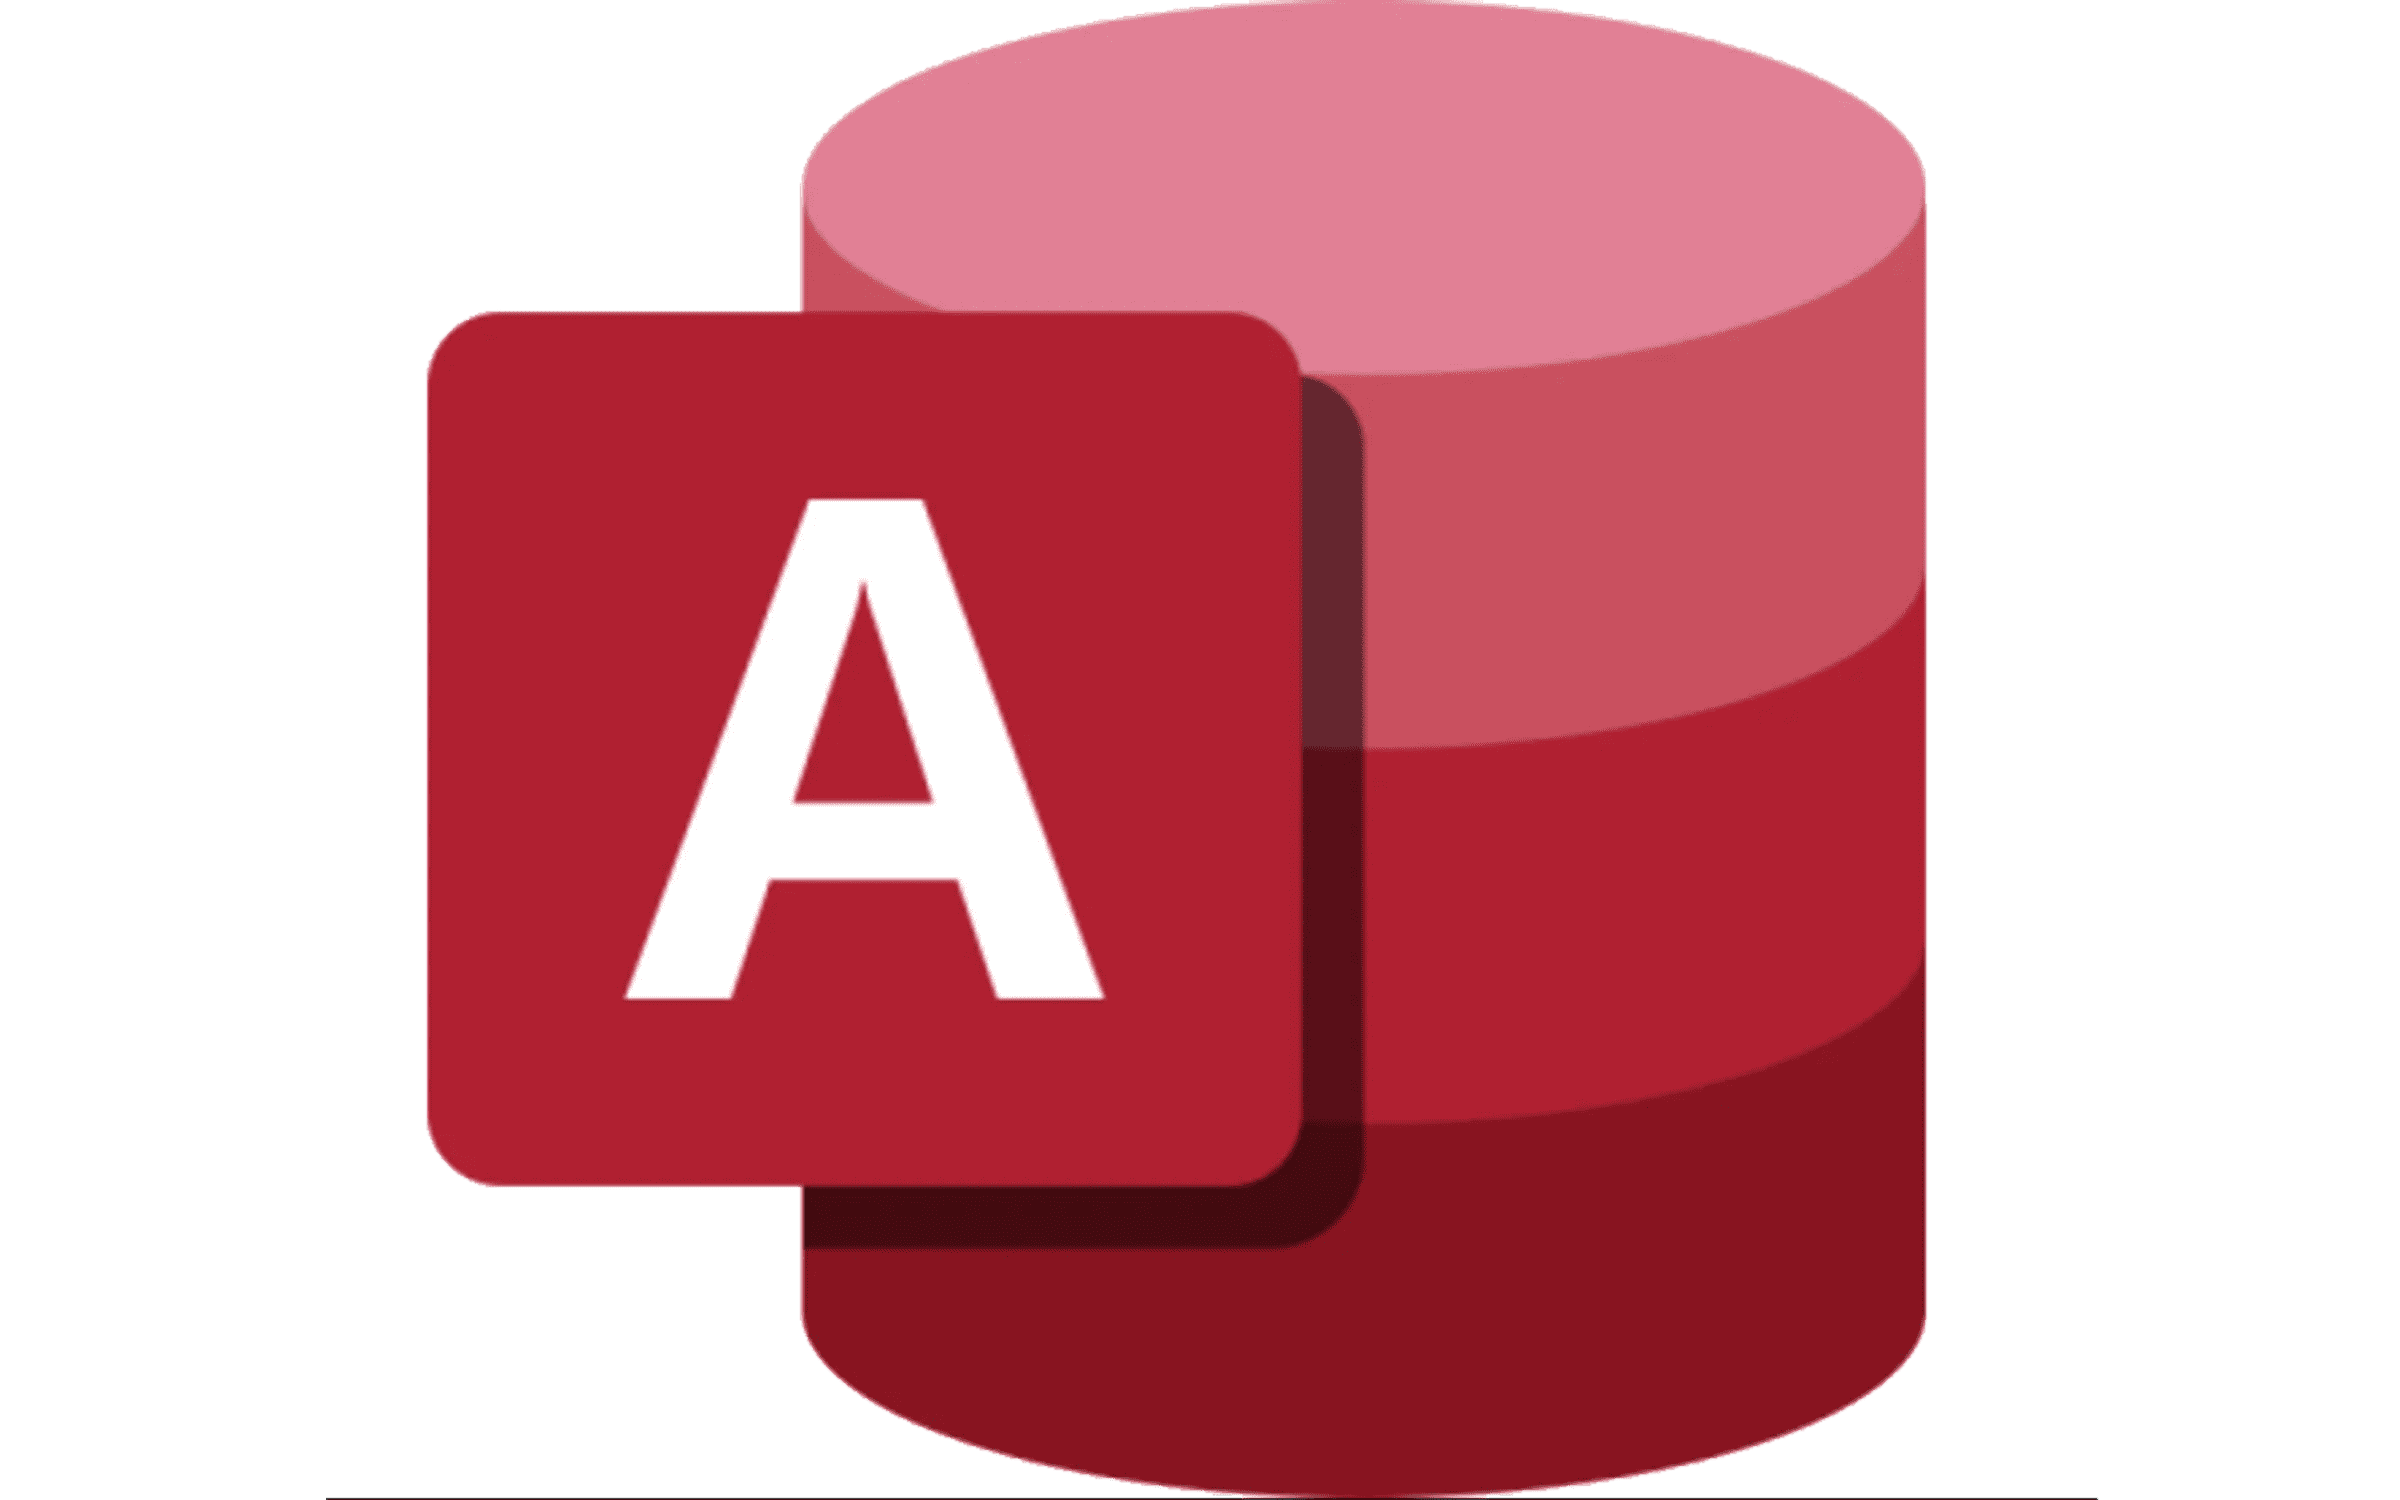 Microsoft access download for windows 10 diskless software free download